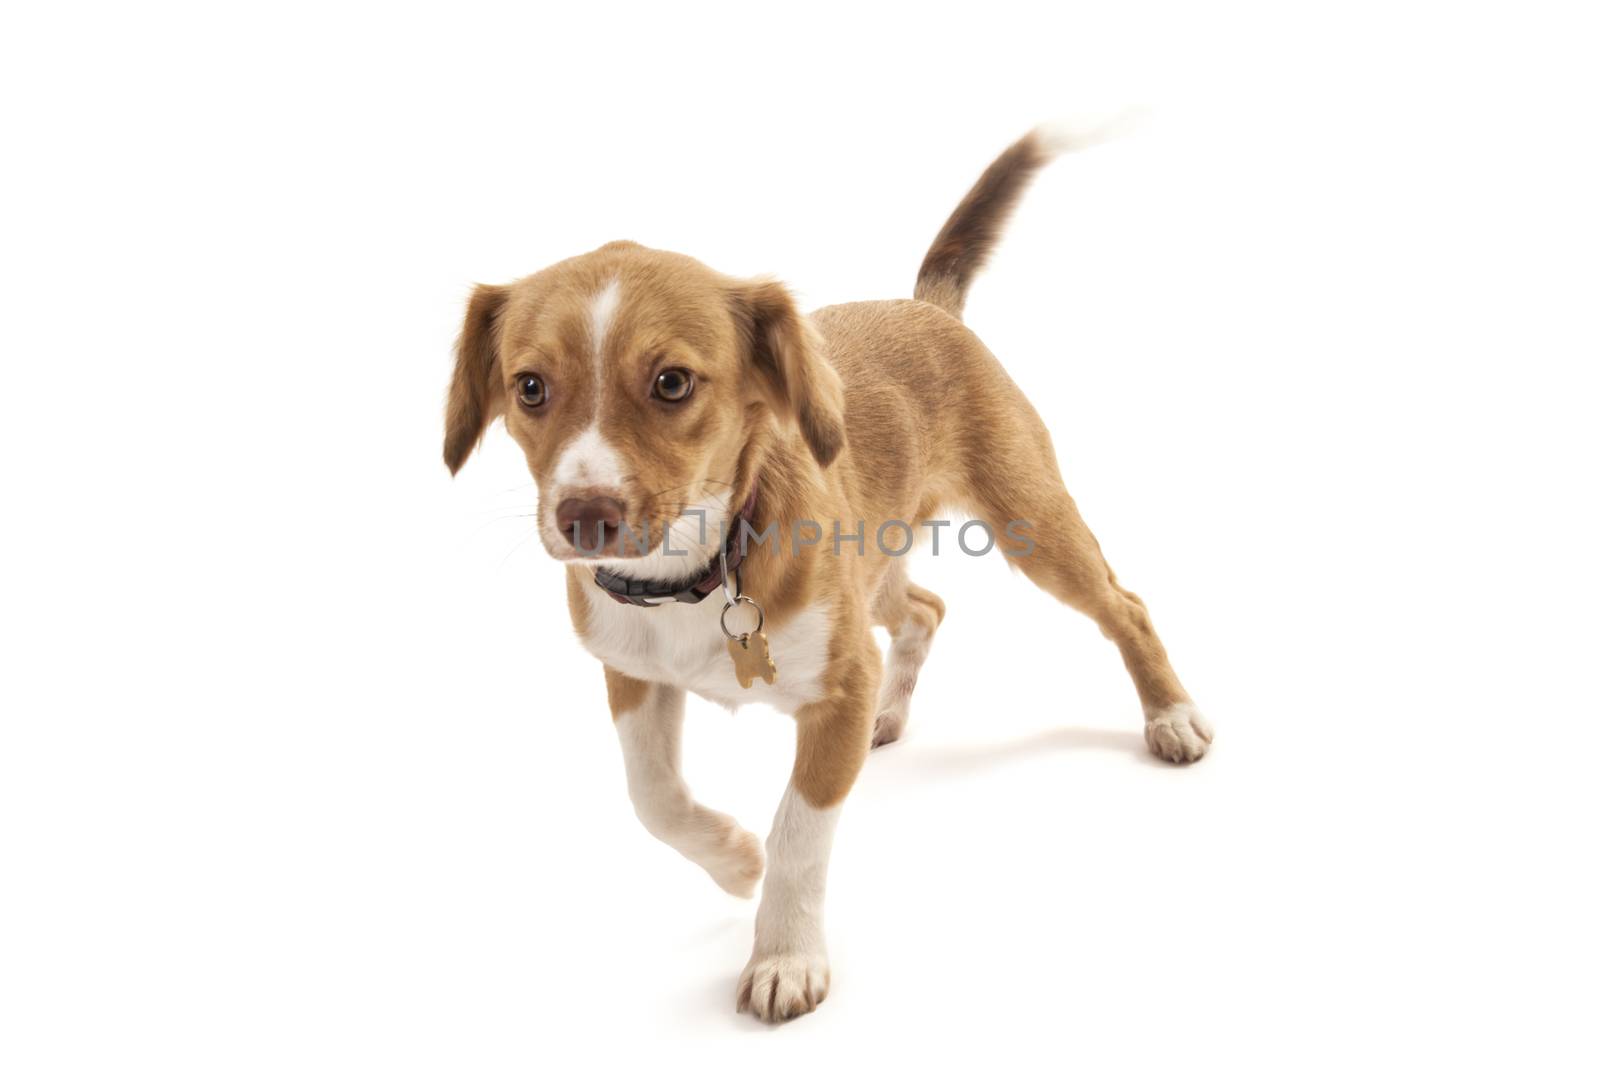 Portrait of mixed breed dog running on white background